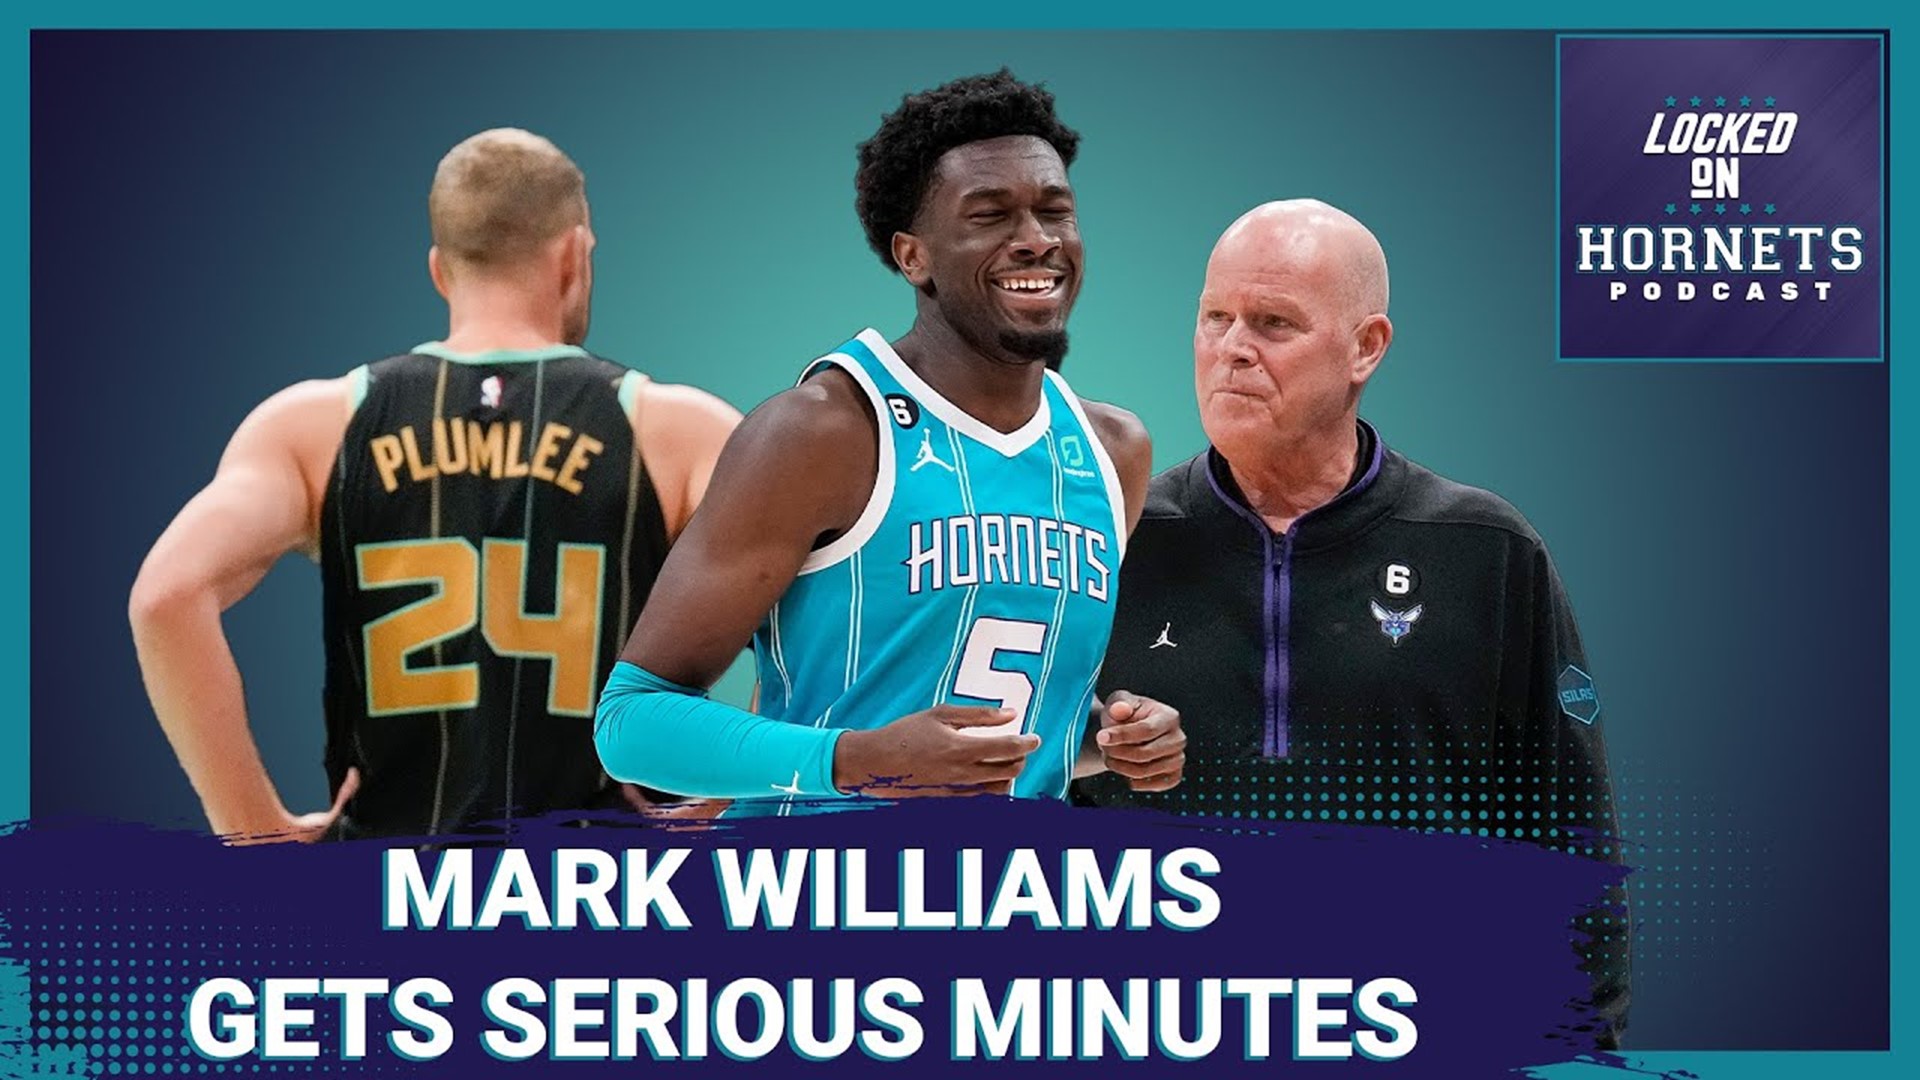 Mark Williams 9 points 6 boards! in rotation debut for Charlotte